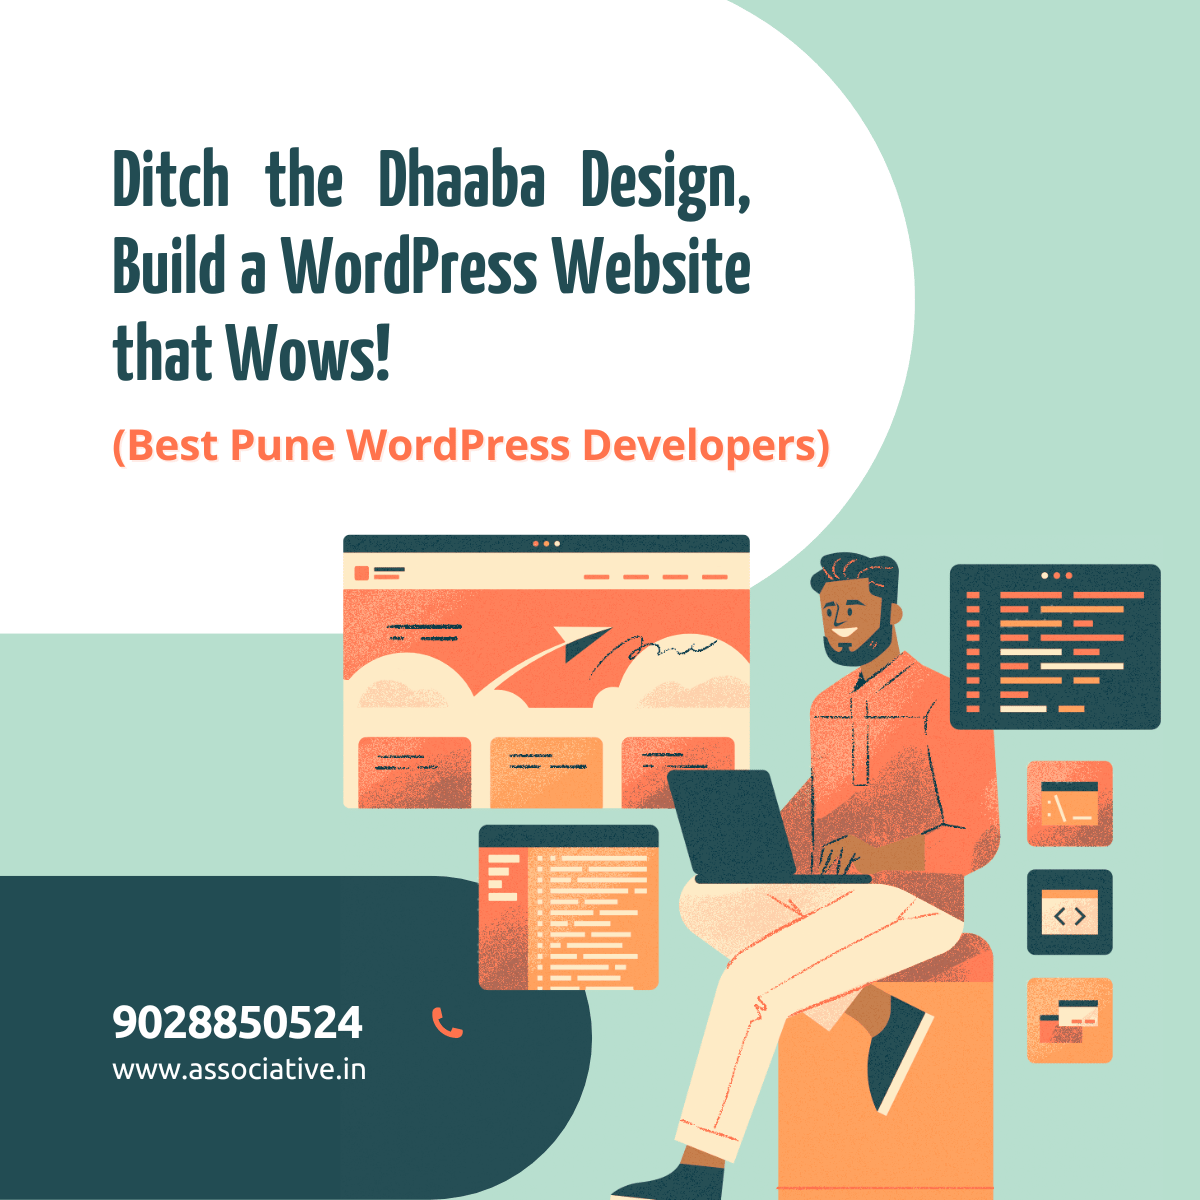 Ditch the Dhaaba Design, Build a WordPress Website that Wows! (Best Pune WordPress Developers)